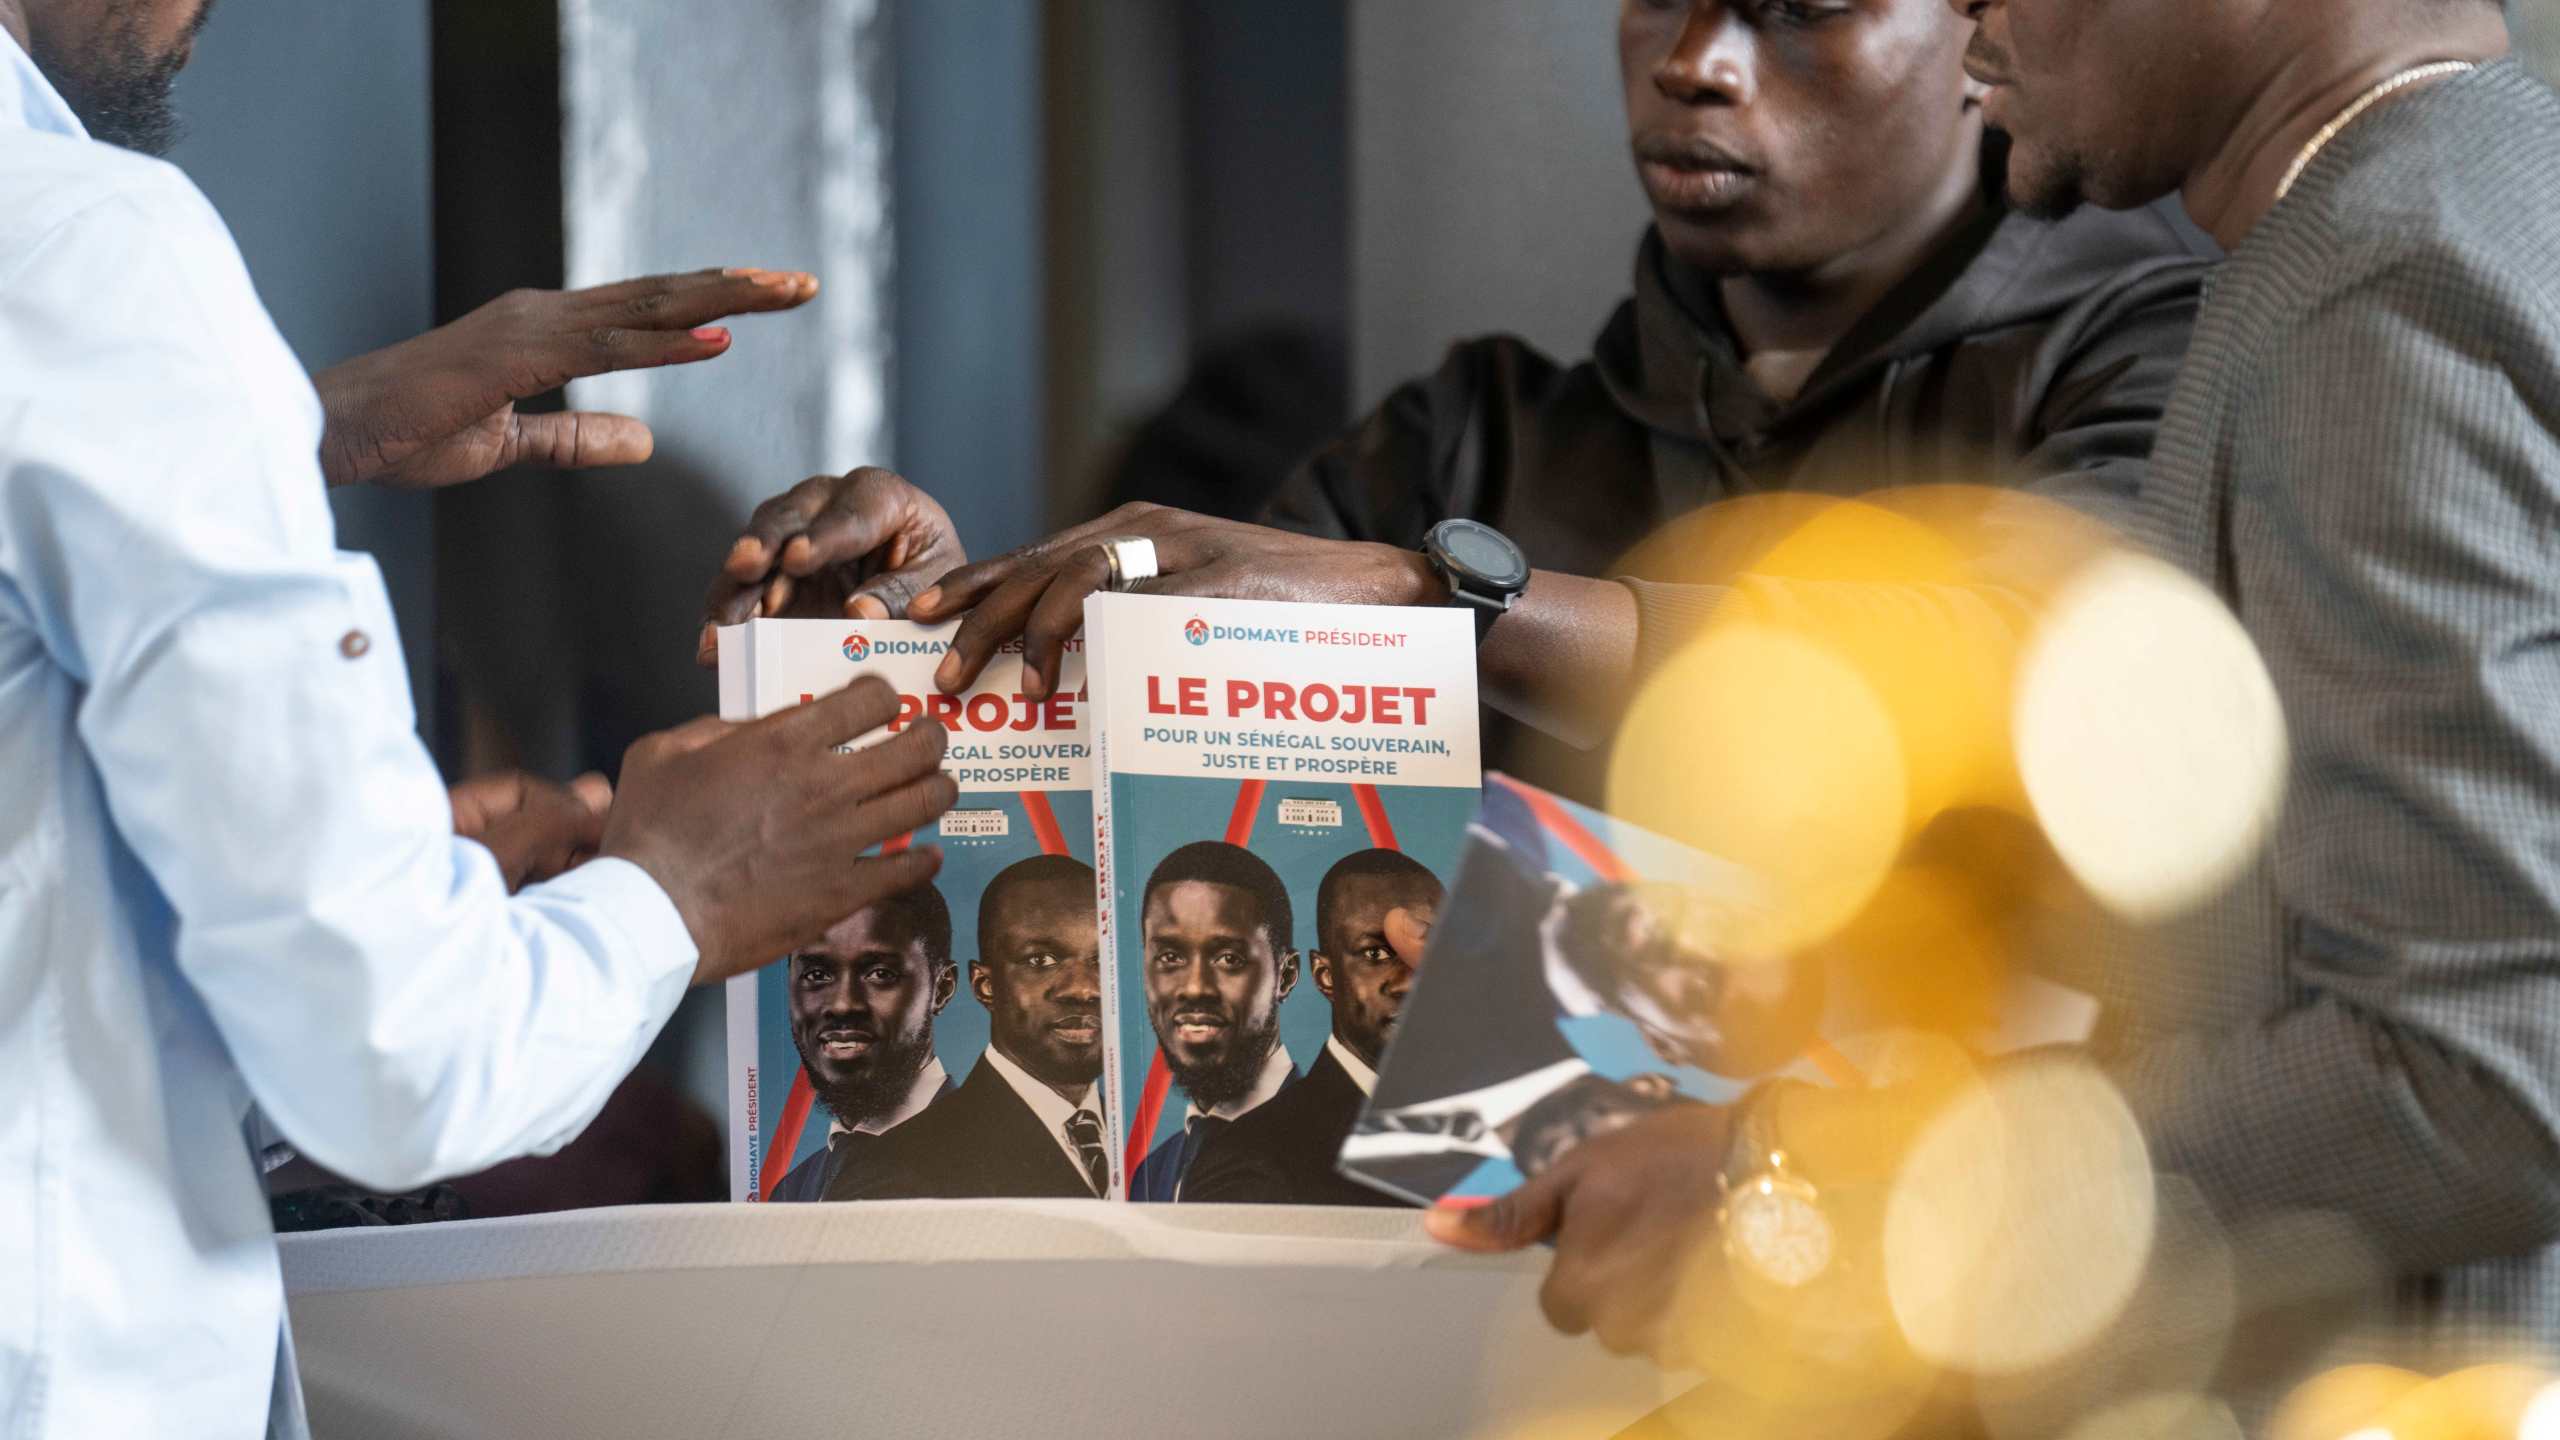 Members of Bassirou Diomaye Faye's campaign display a book called "The Project" as he holds a press conference after winning the presidential elections in Dakar, Senegal, on Monday, March 25, 2024. (AP Photo/Mosa'ab Elshamy)